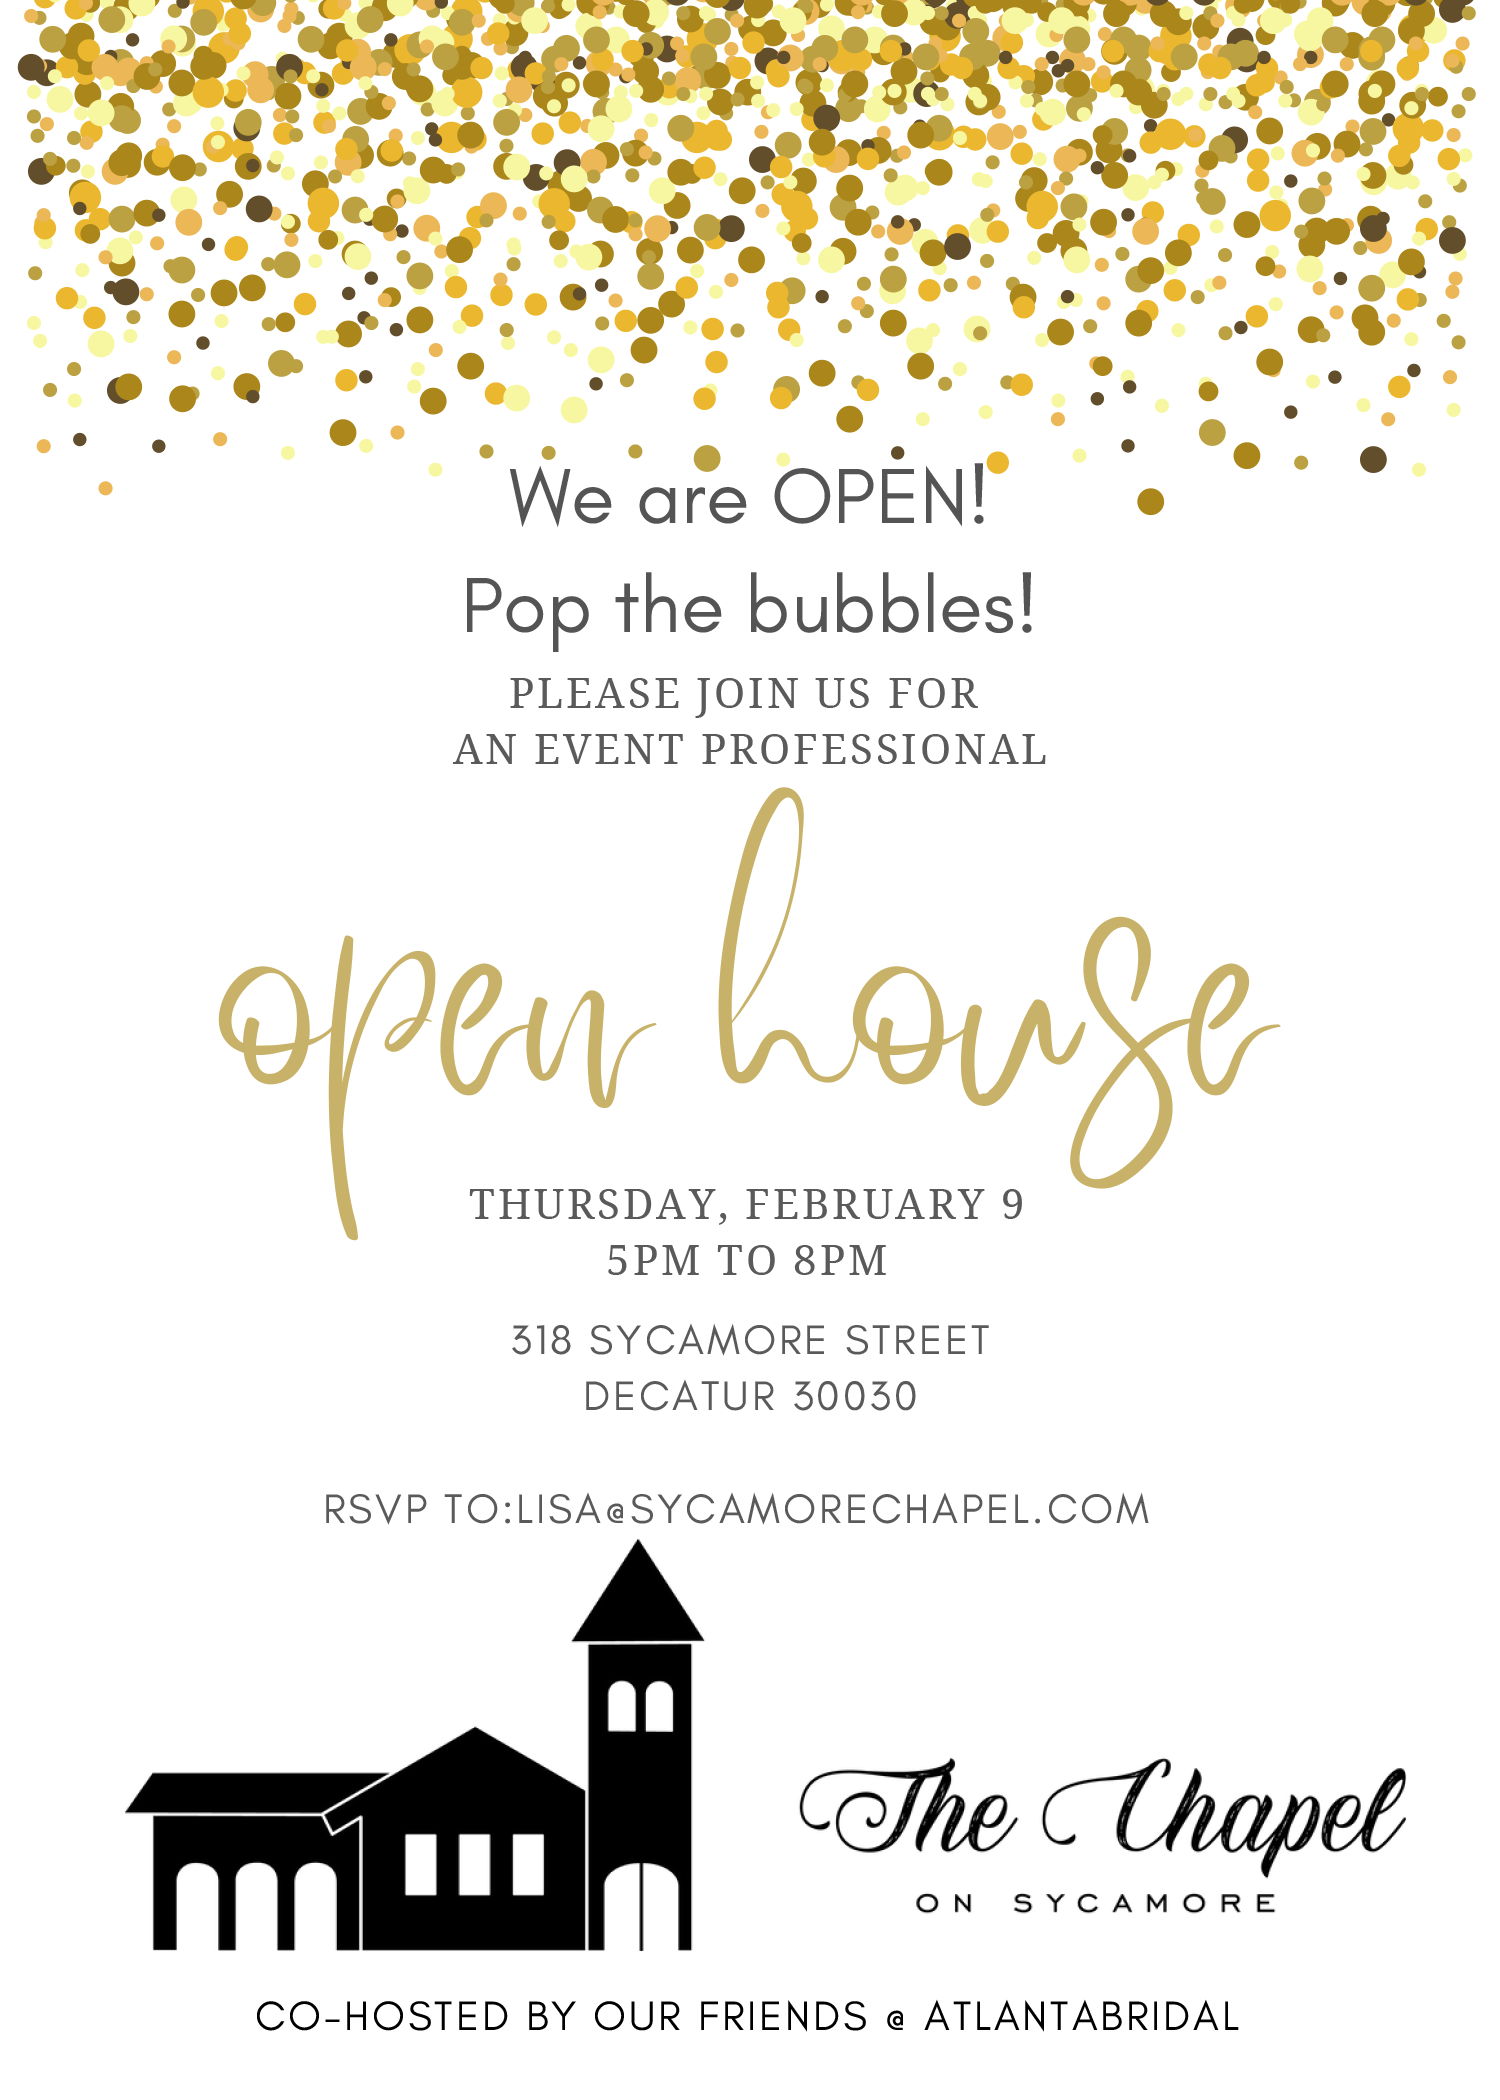 Image for post: Open House and Networking Event for Wedding Professionals at The Chapel on Sycamore